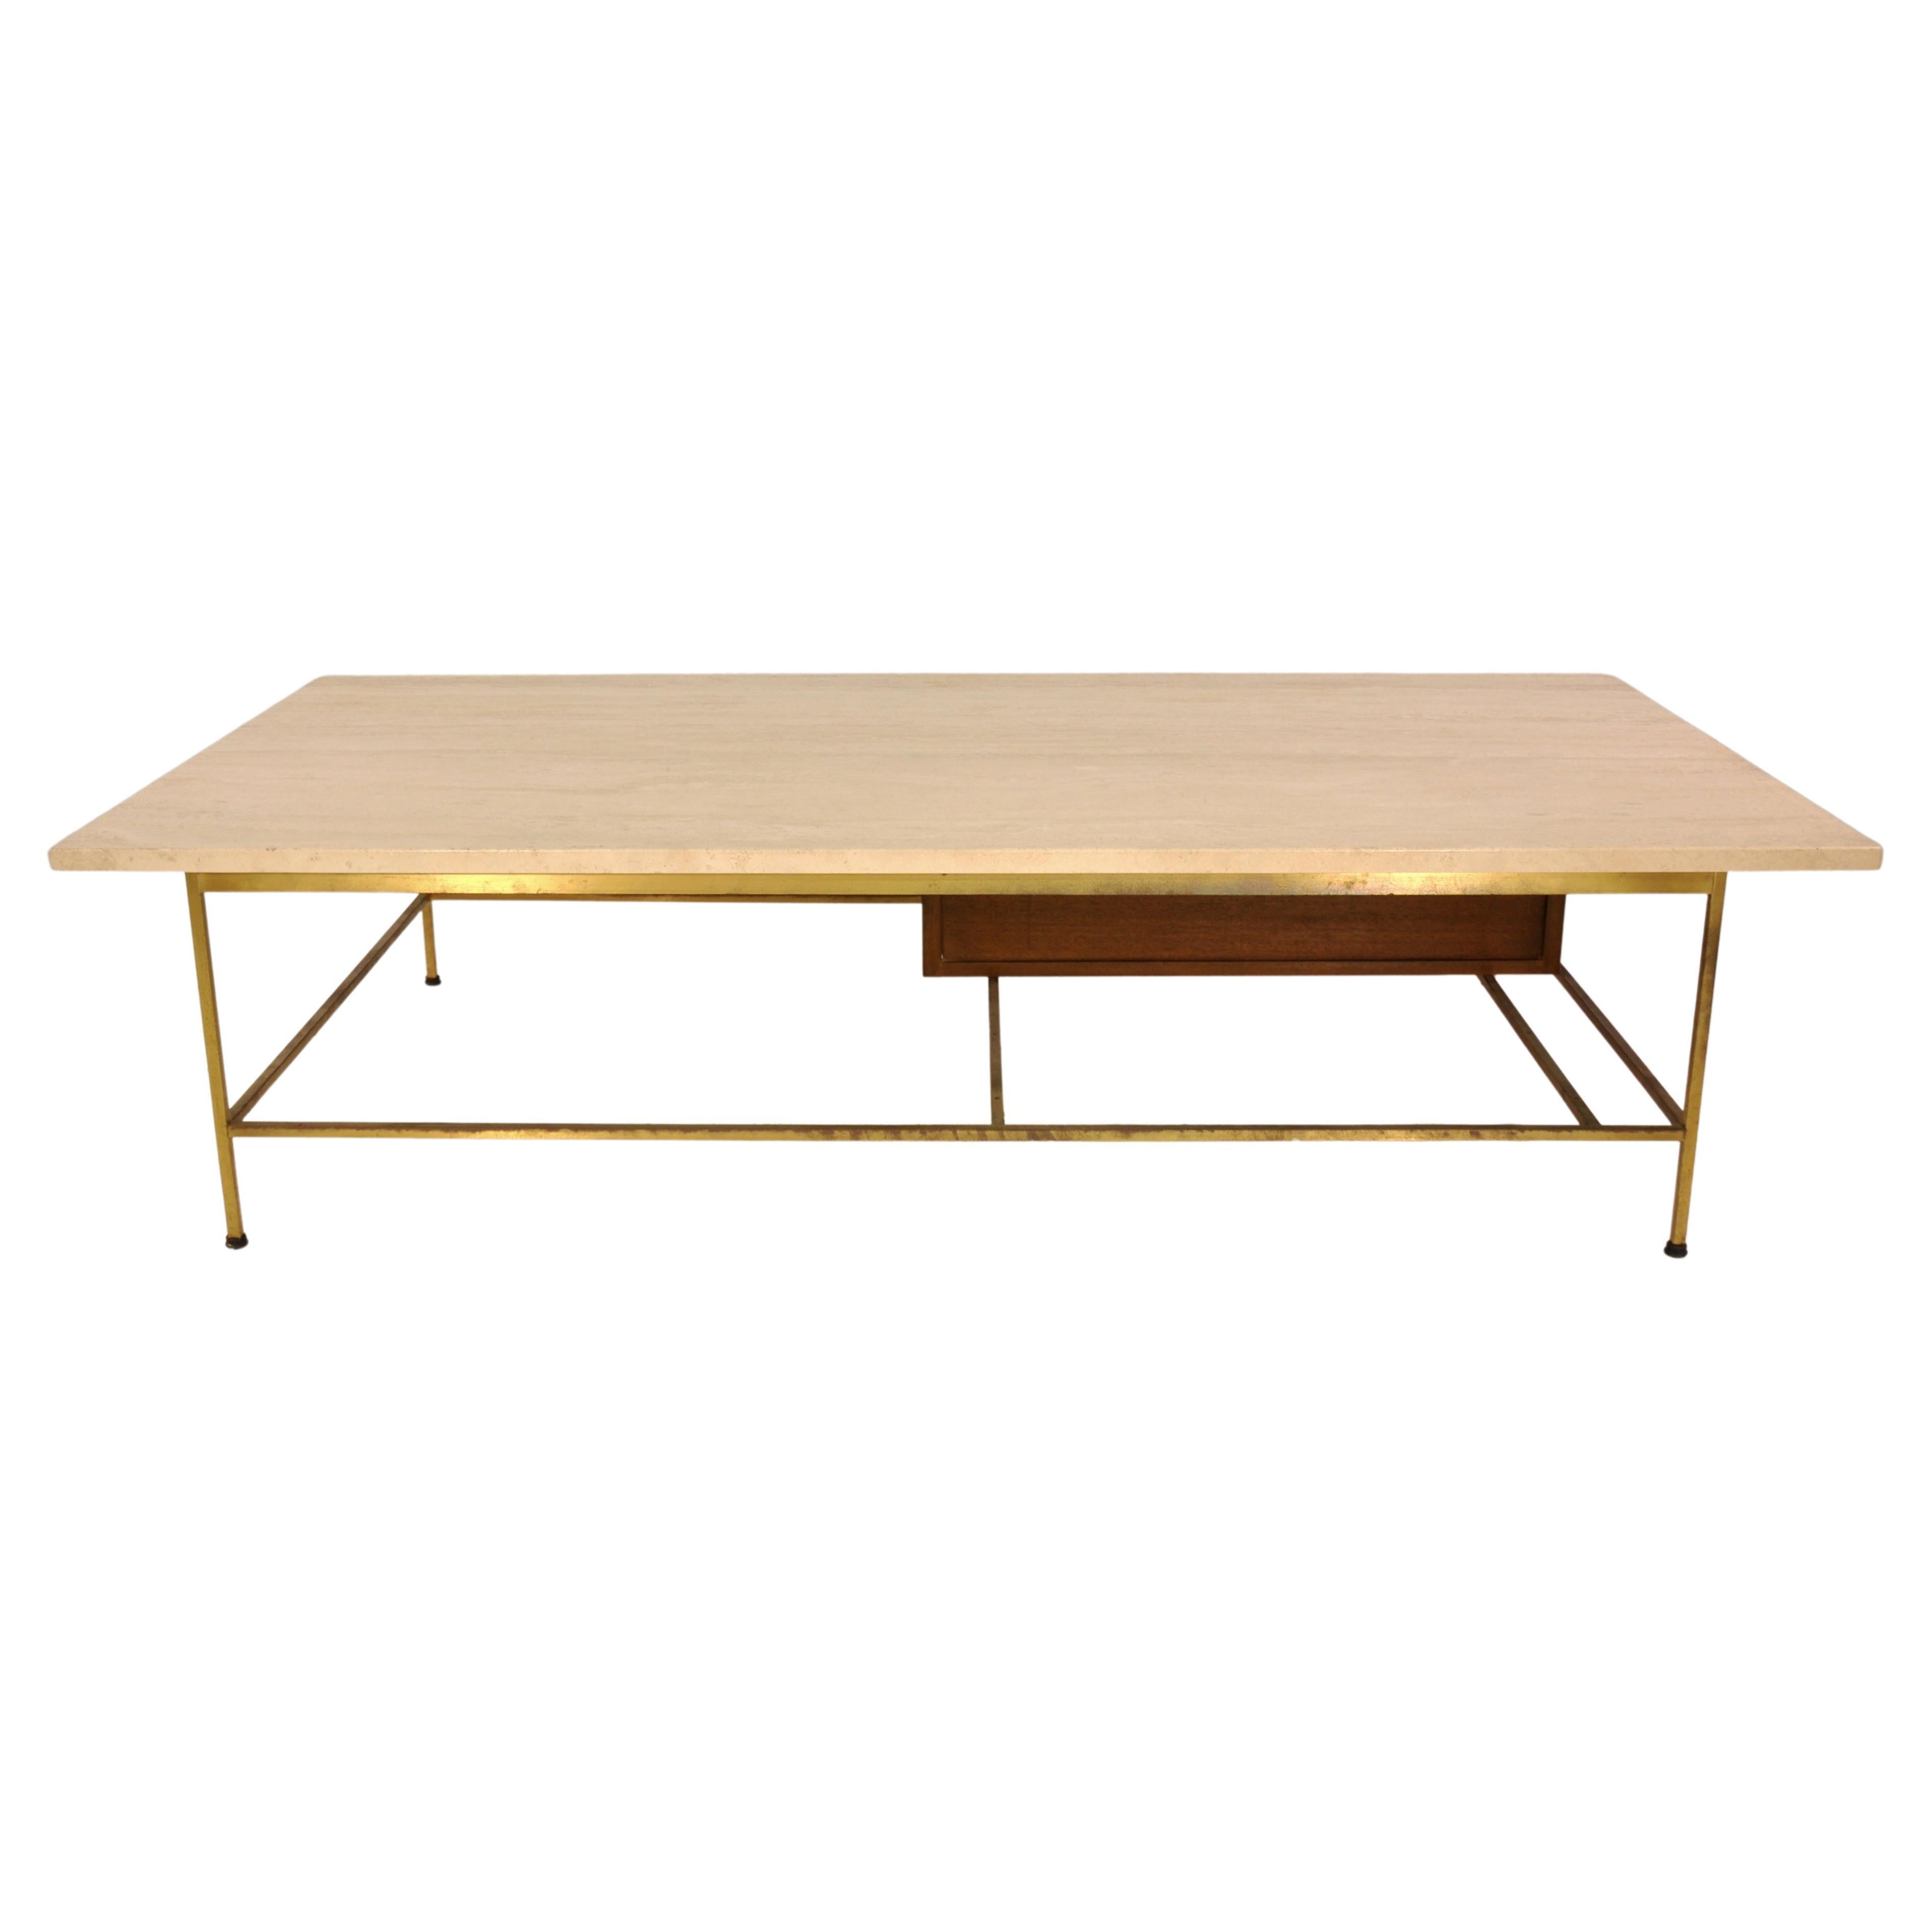 Mid-20th Century Paul McCobb Irwin Collection Brass and Travertine Coffee Table by Calvin For Sale